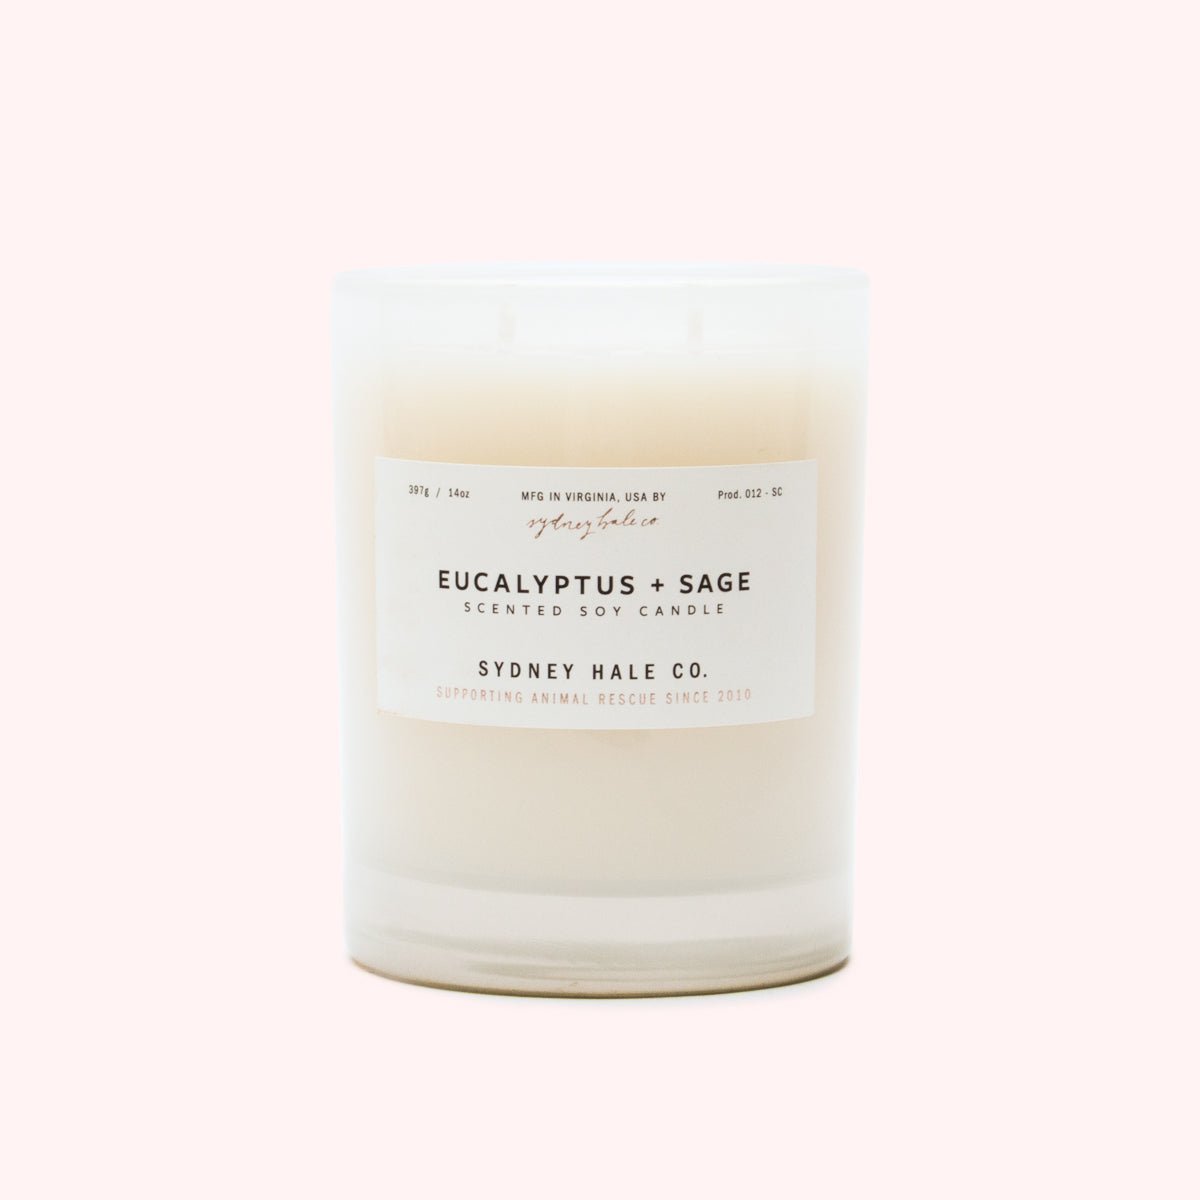 A cylindrical glass candle filled with a soy wax blend and two double cotton wicks. Label reads: "397g/14 oz. Manufactured in Virginia, USA by Sydney Hale Co. Eucalyptus + Sage scented soy candle. Sydney Hale Co. Supporting Animal rescue since 2010."